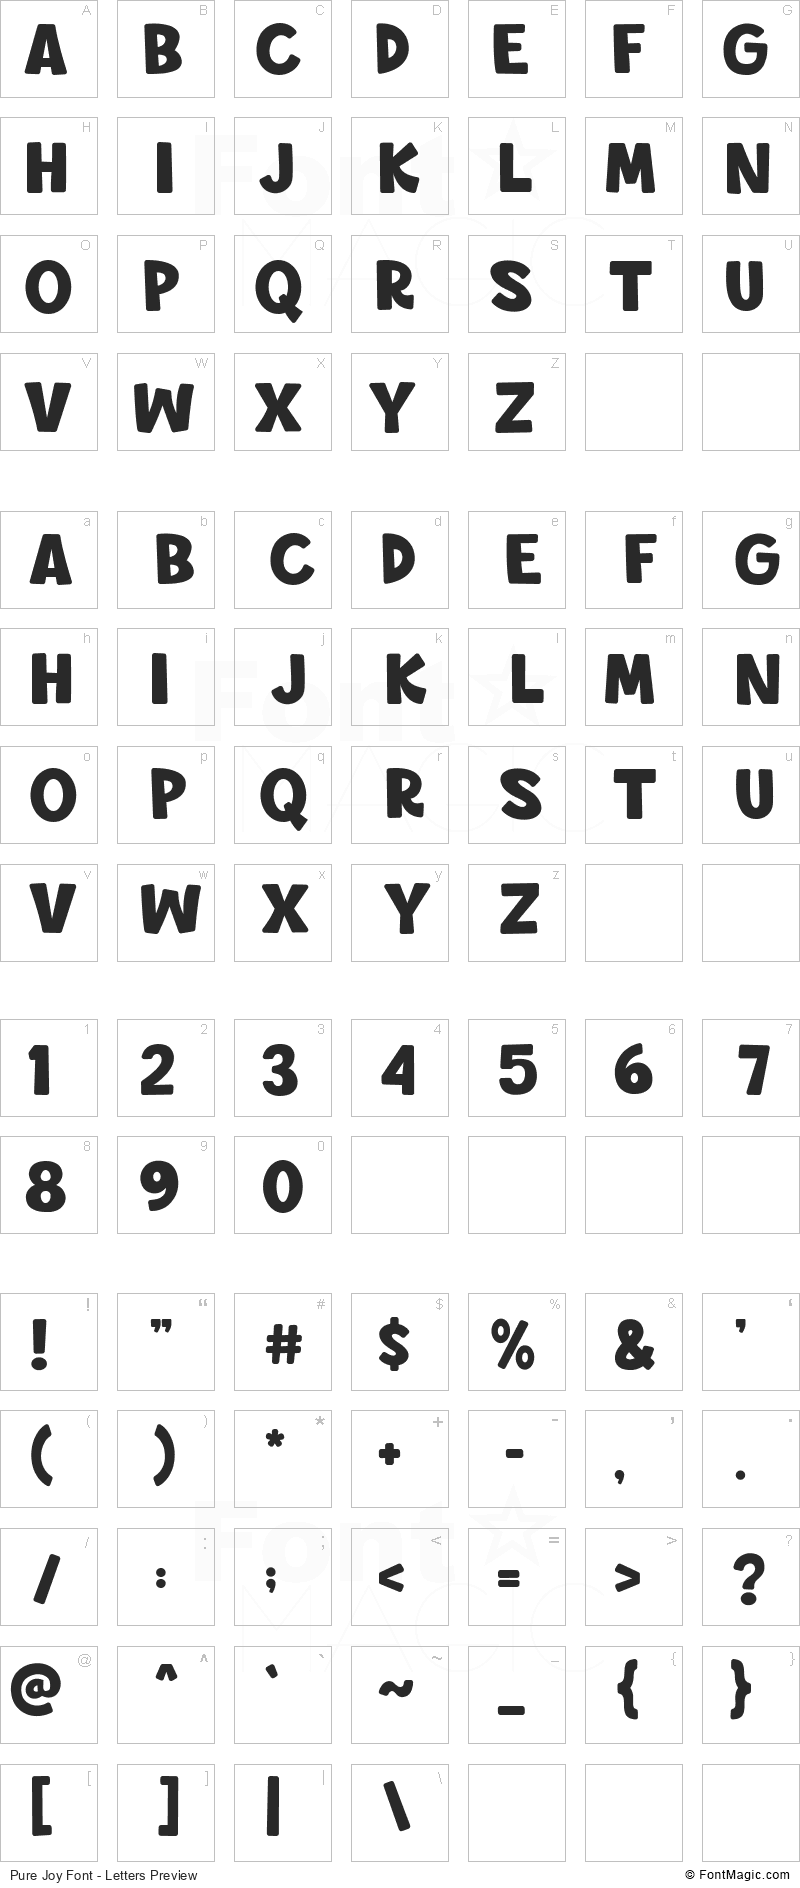 Pure Joy Font - All Latters Preview Chart